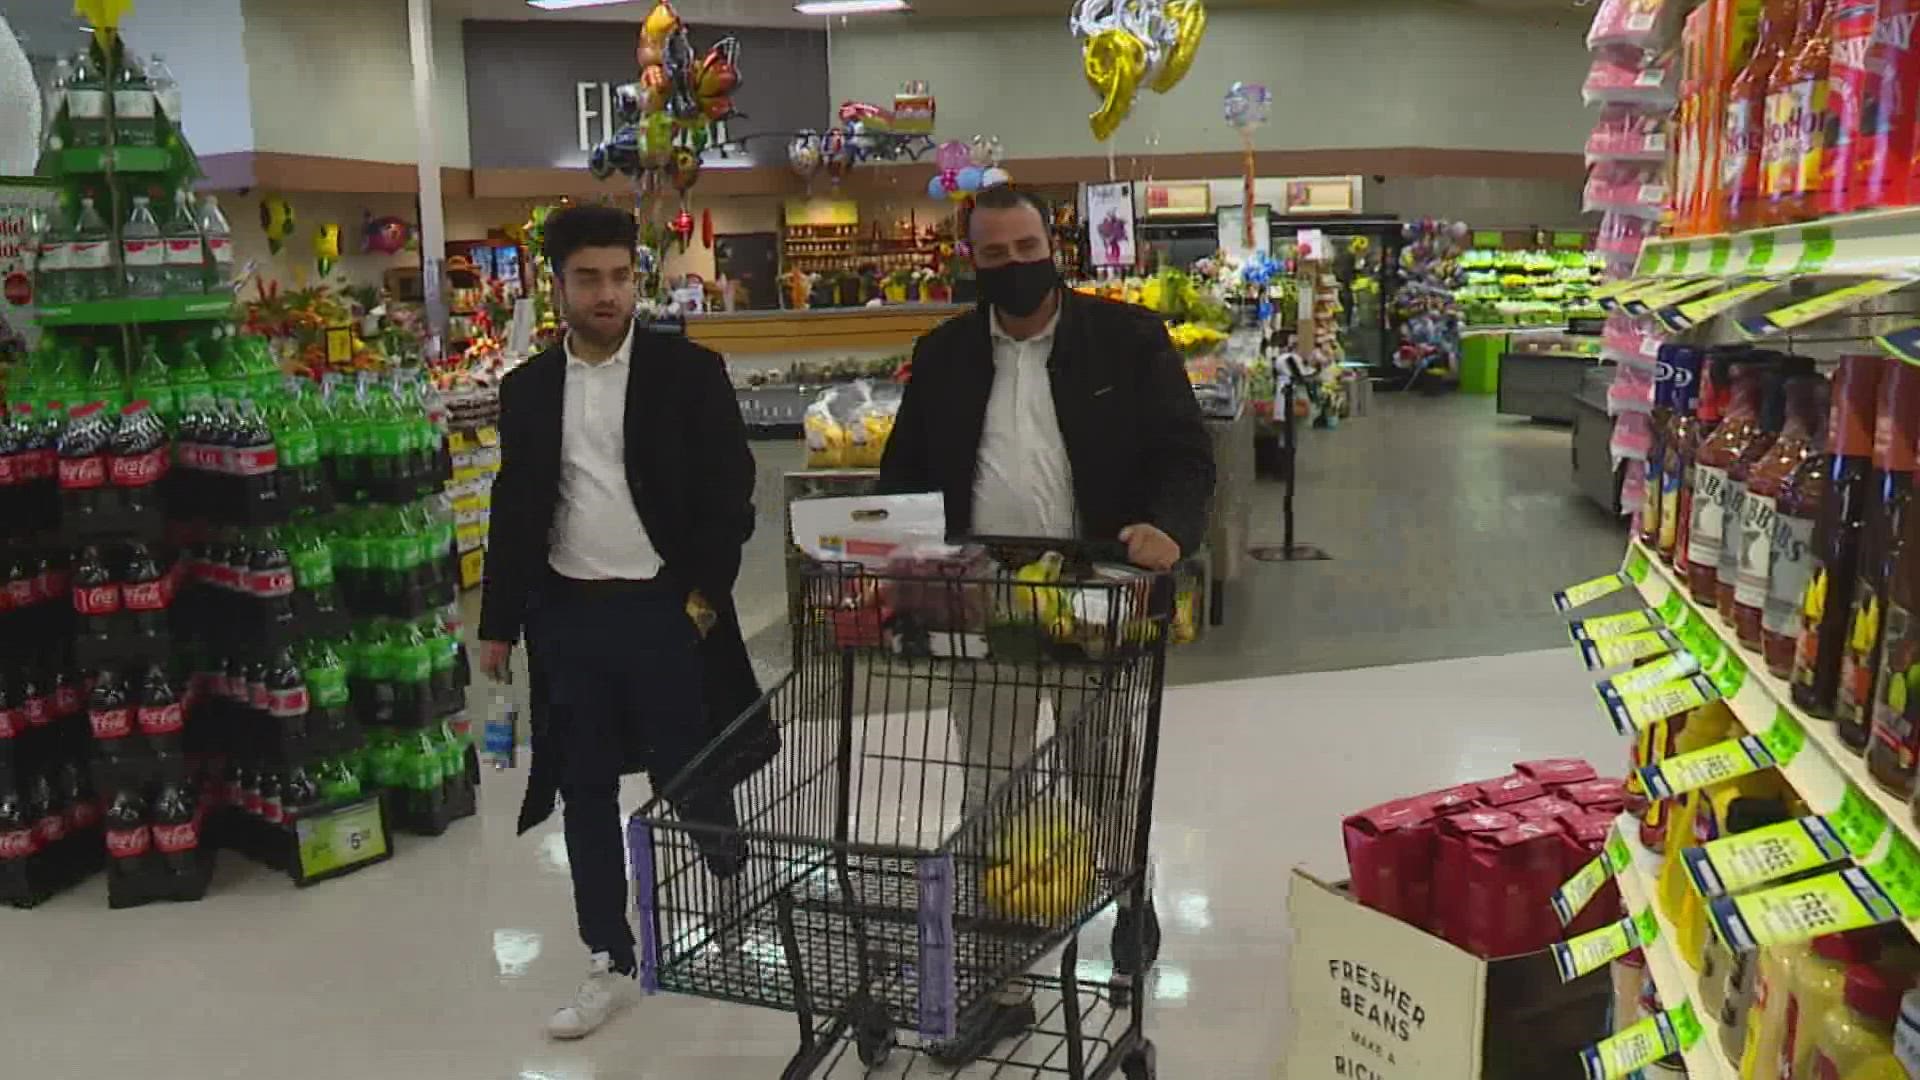 Next month, Safeway will host a job fair specifically for Afghan refugees.